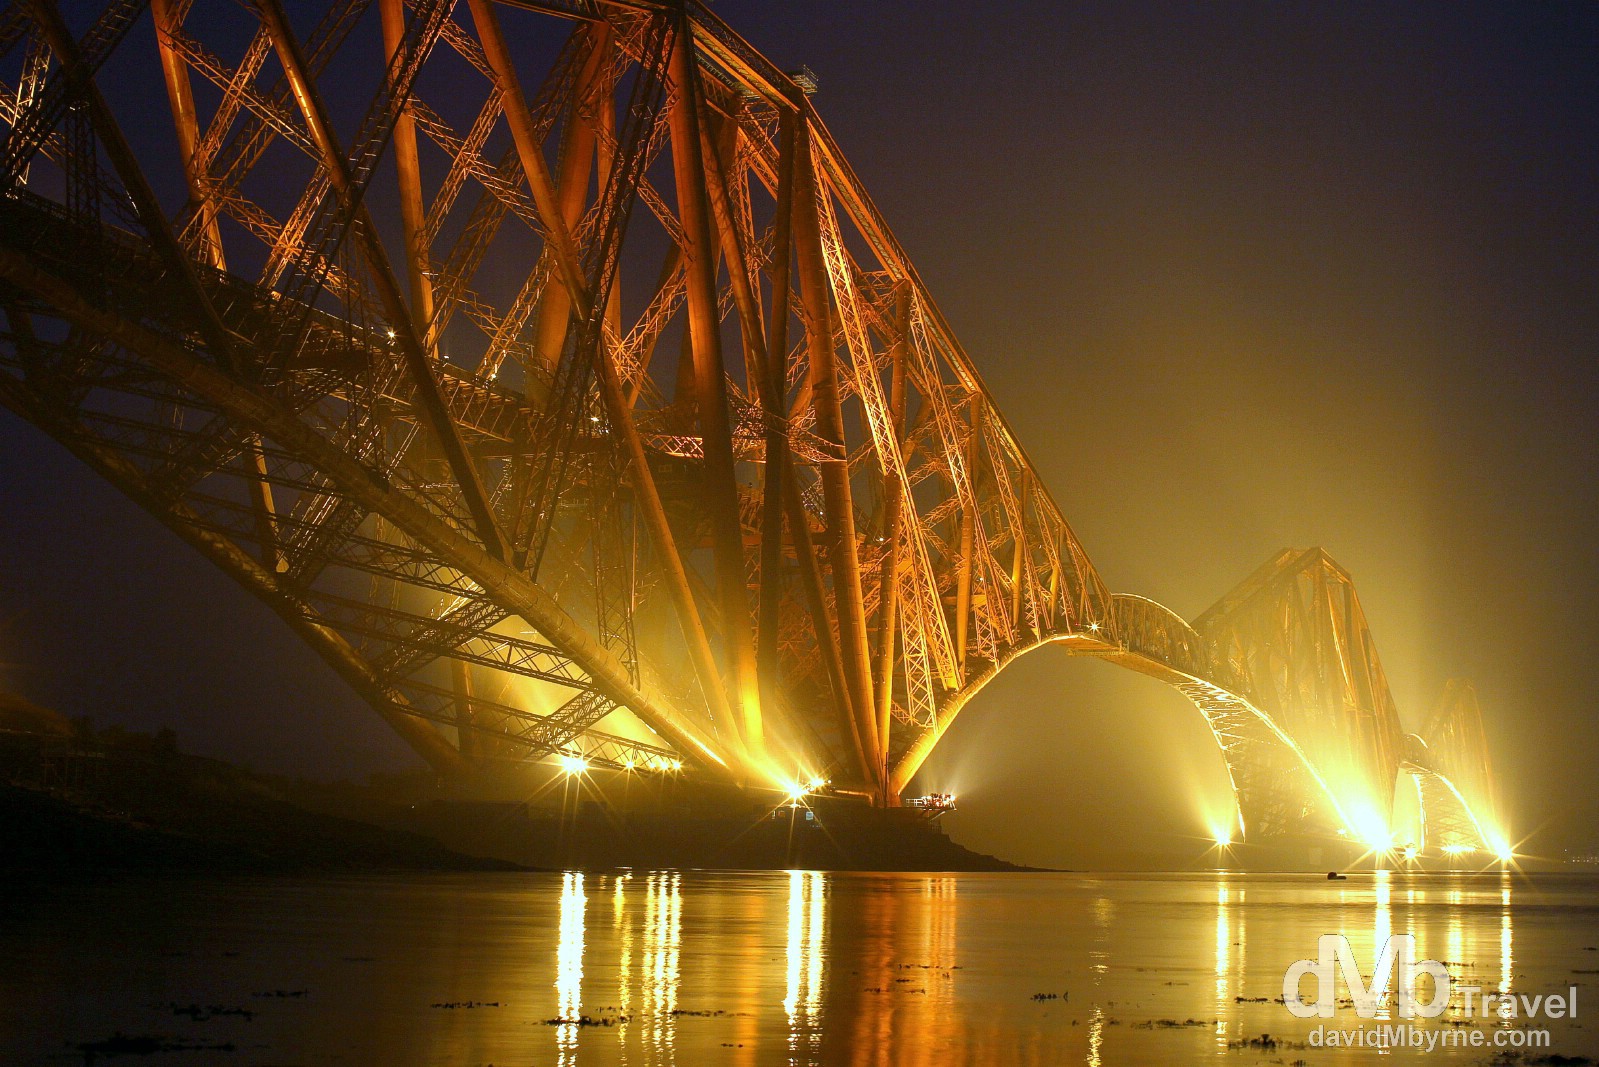 Forth Rail Bridge crossing the Firth of Forth, Scotland. September 12, 2014.